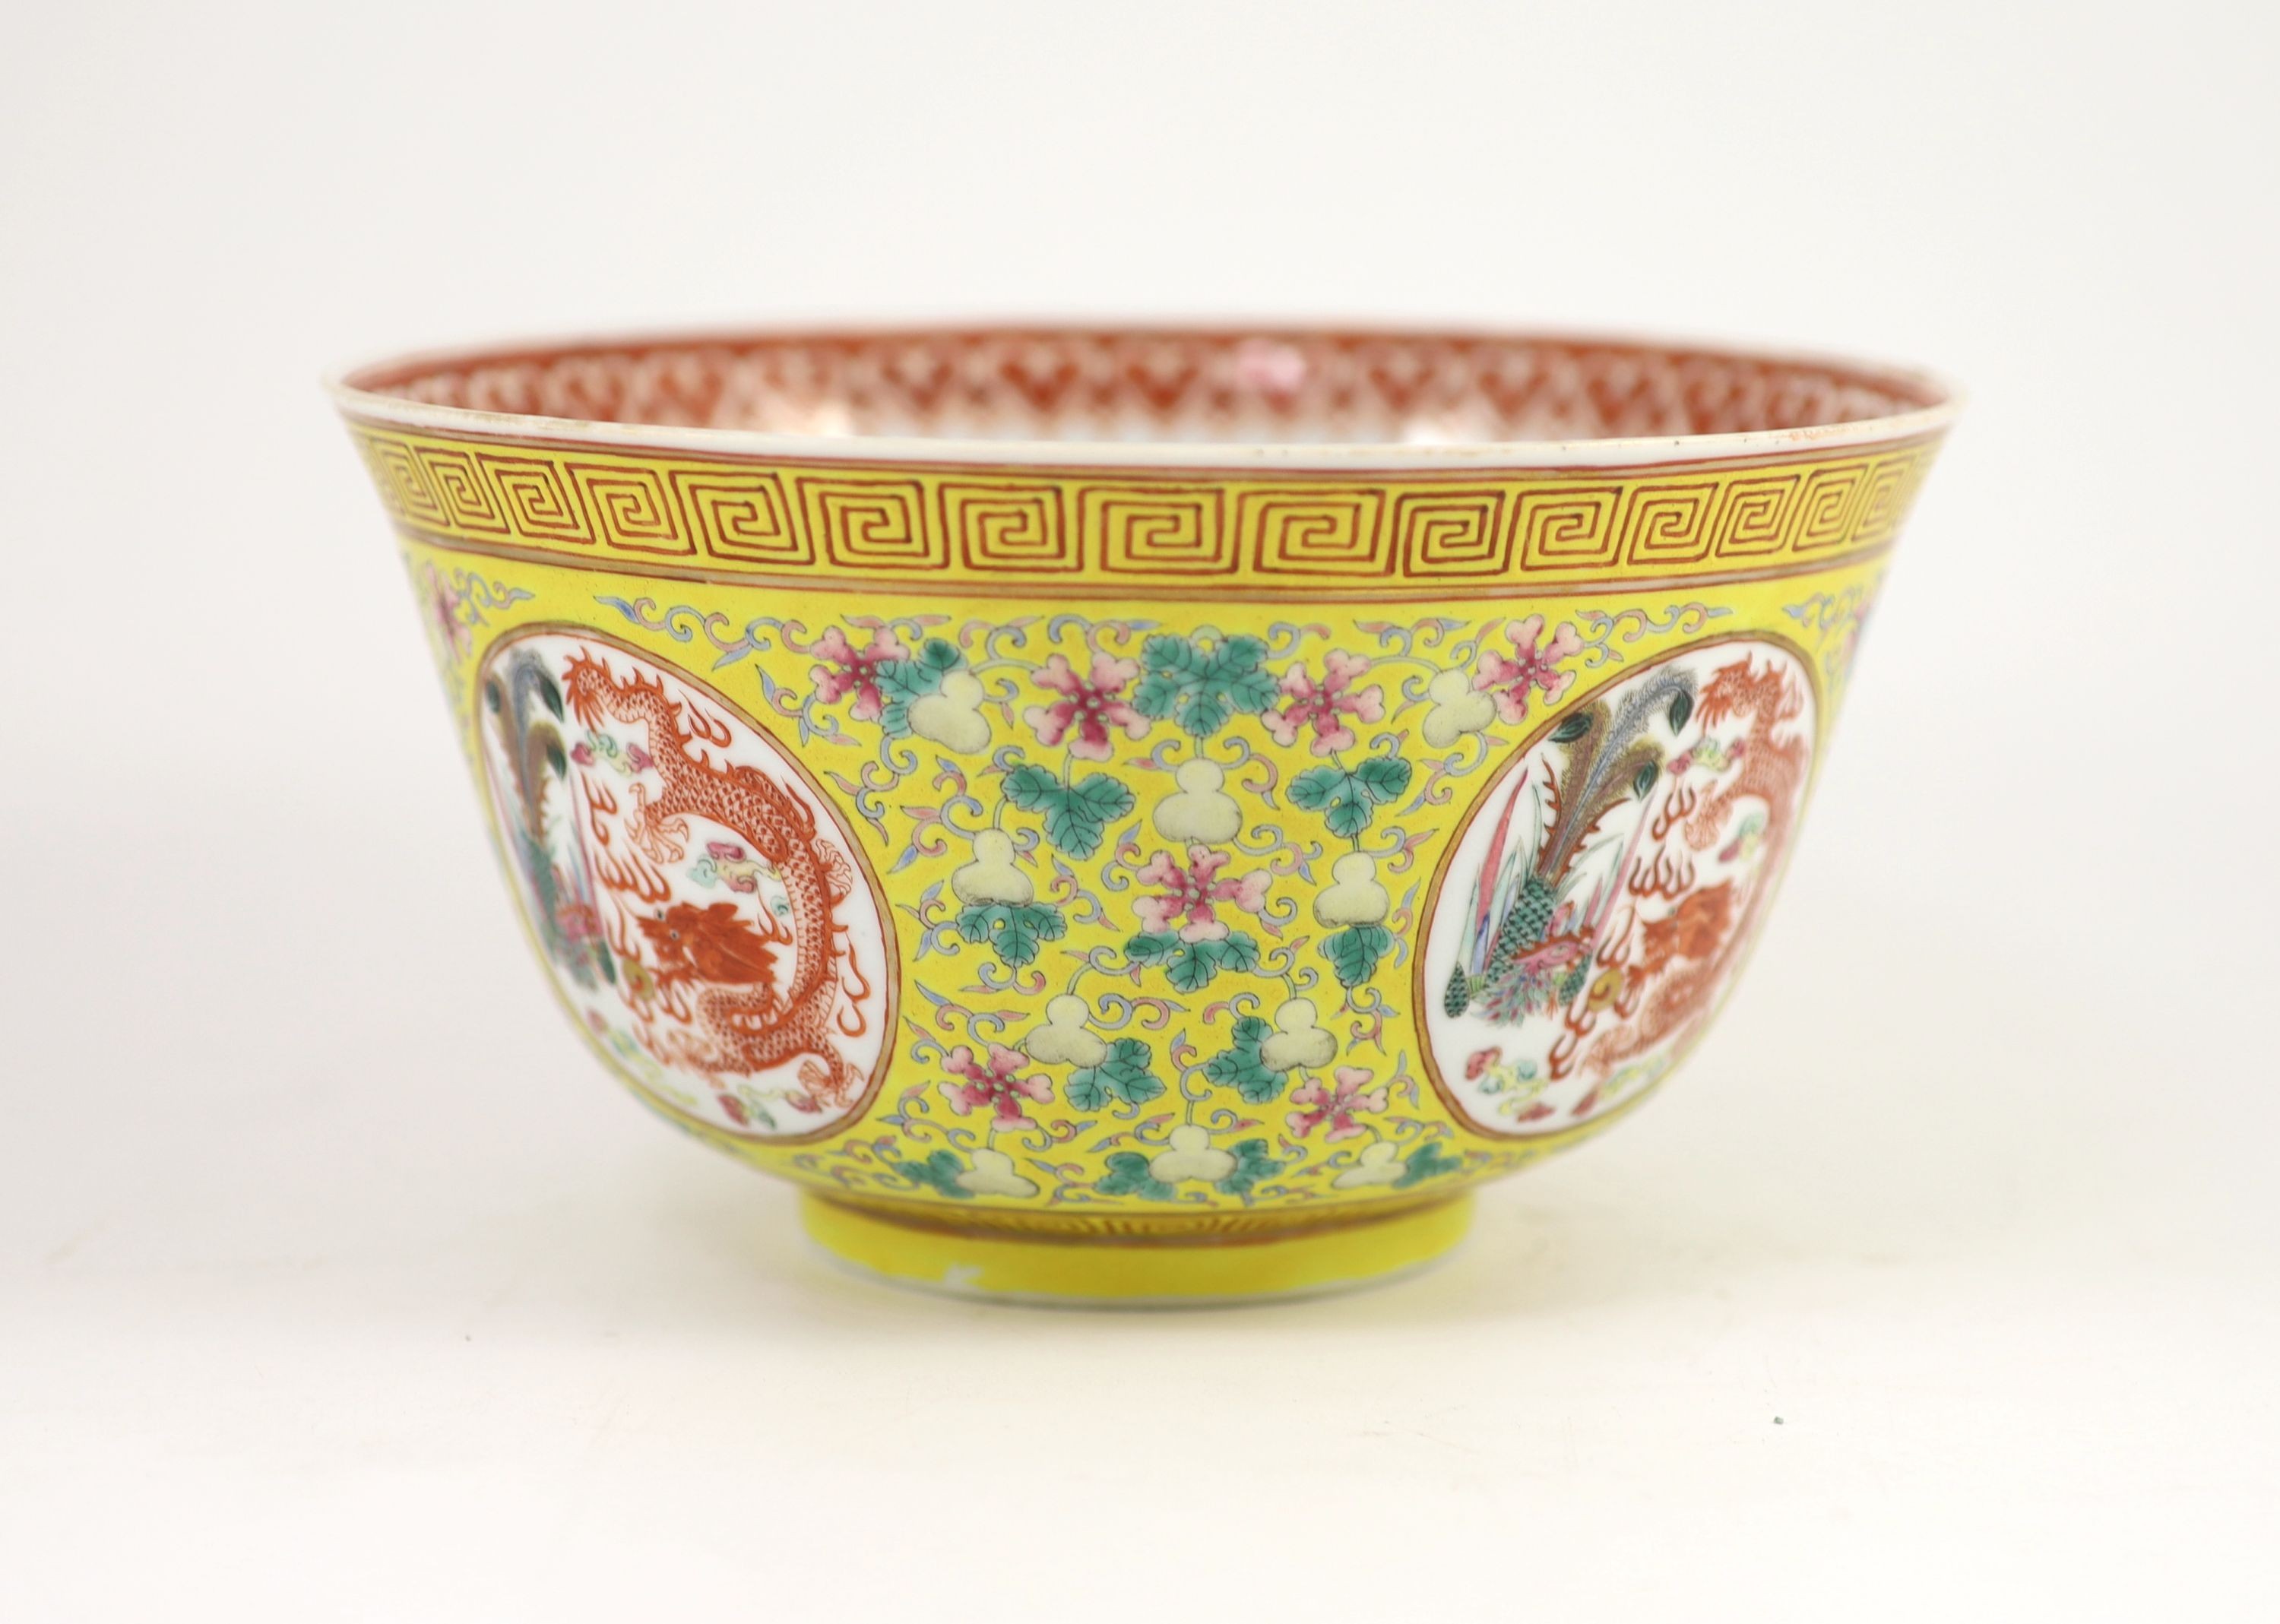 A fine Chinese yellow ground 'dragon and phoenix' medallion deep bowl, Guangxu mark and period (1875-1908), 20.6 cm diameter, 11.2 cm high, gilding to rim worn